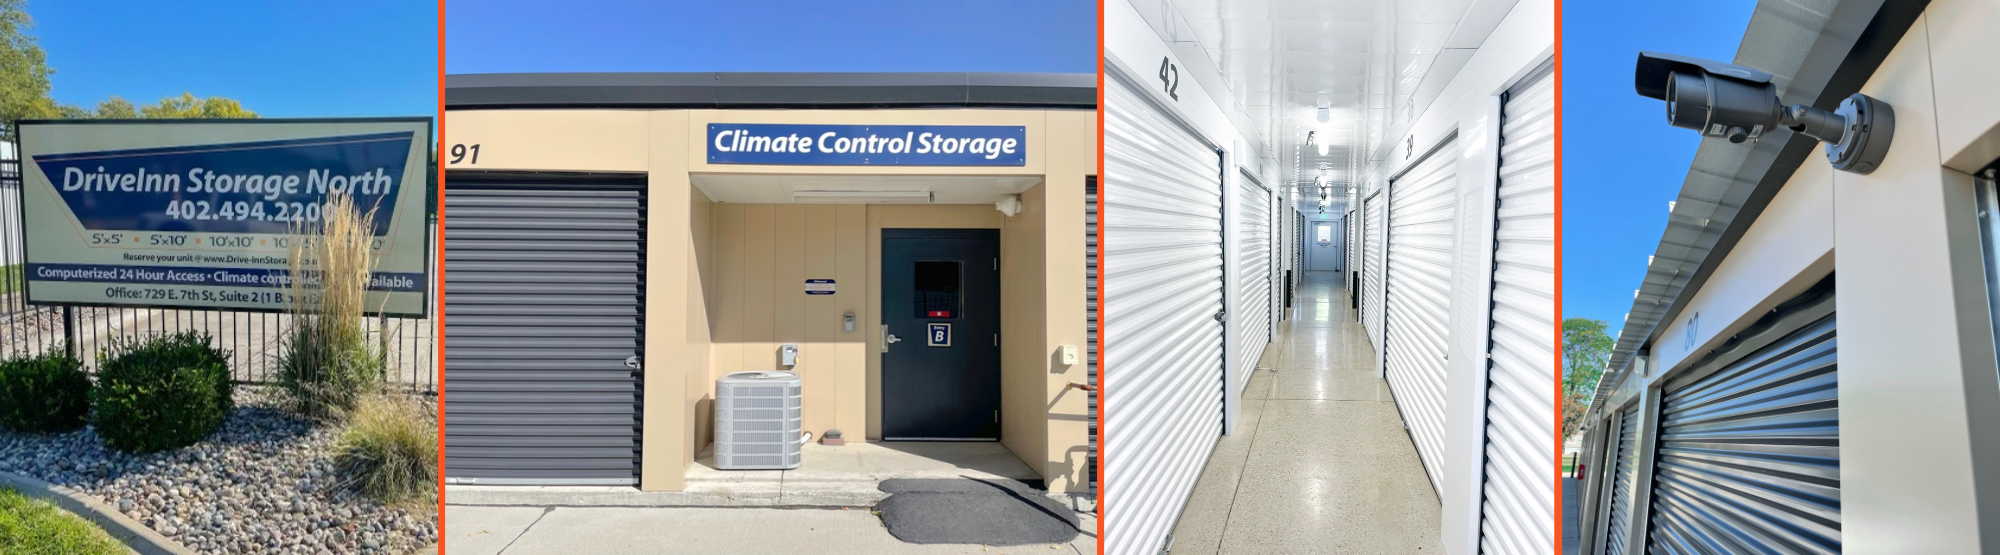 Climate Controlled Storage in South Sioux City, ND